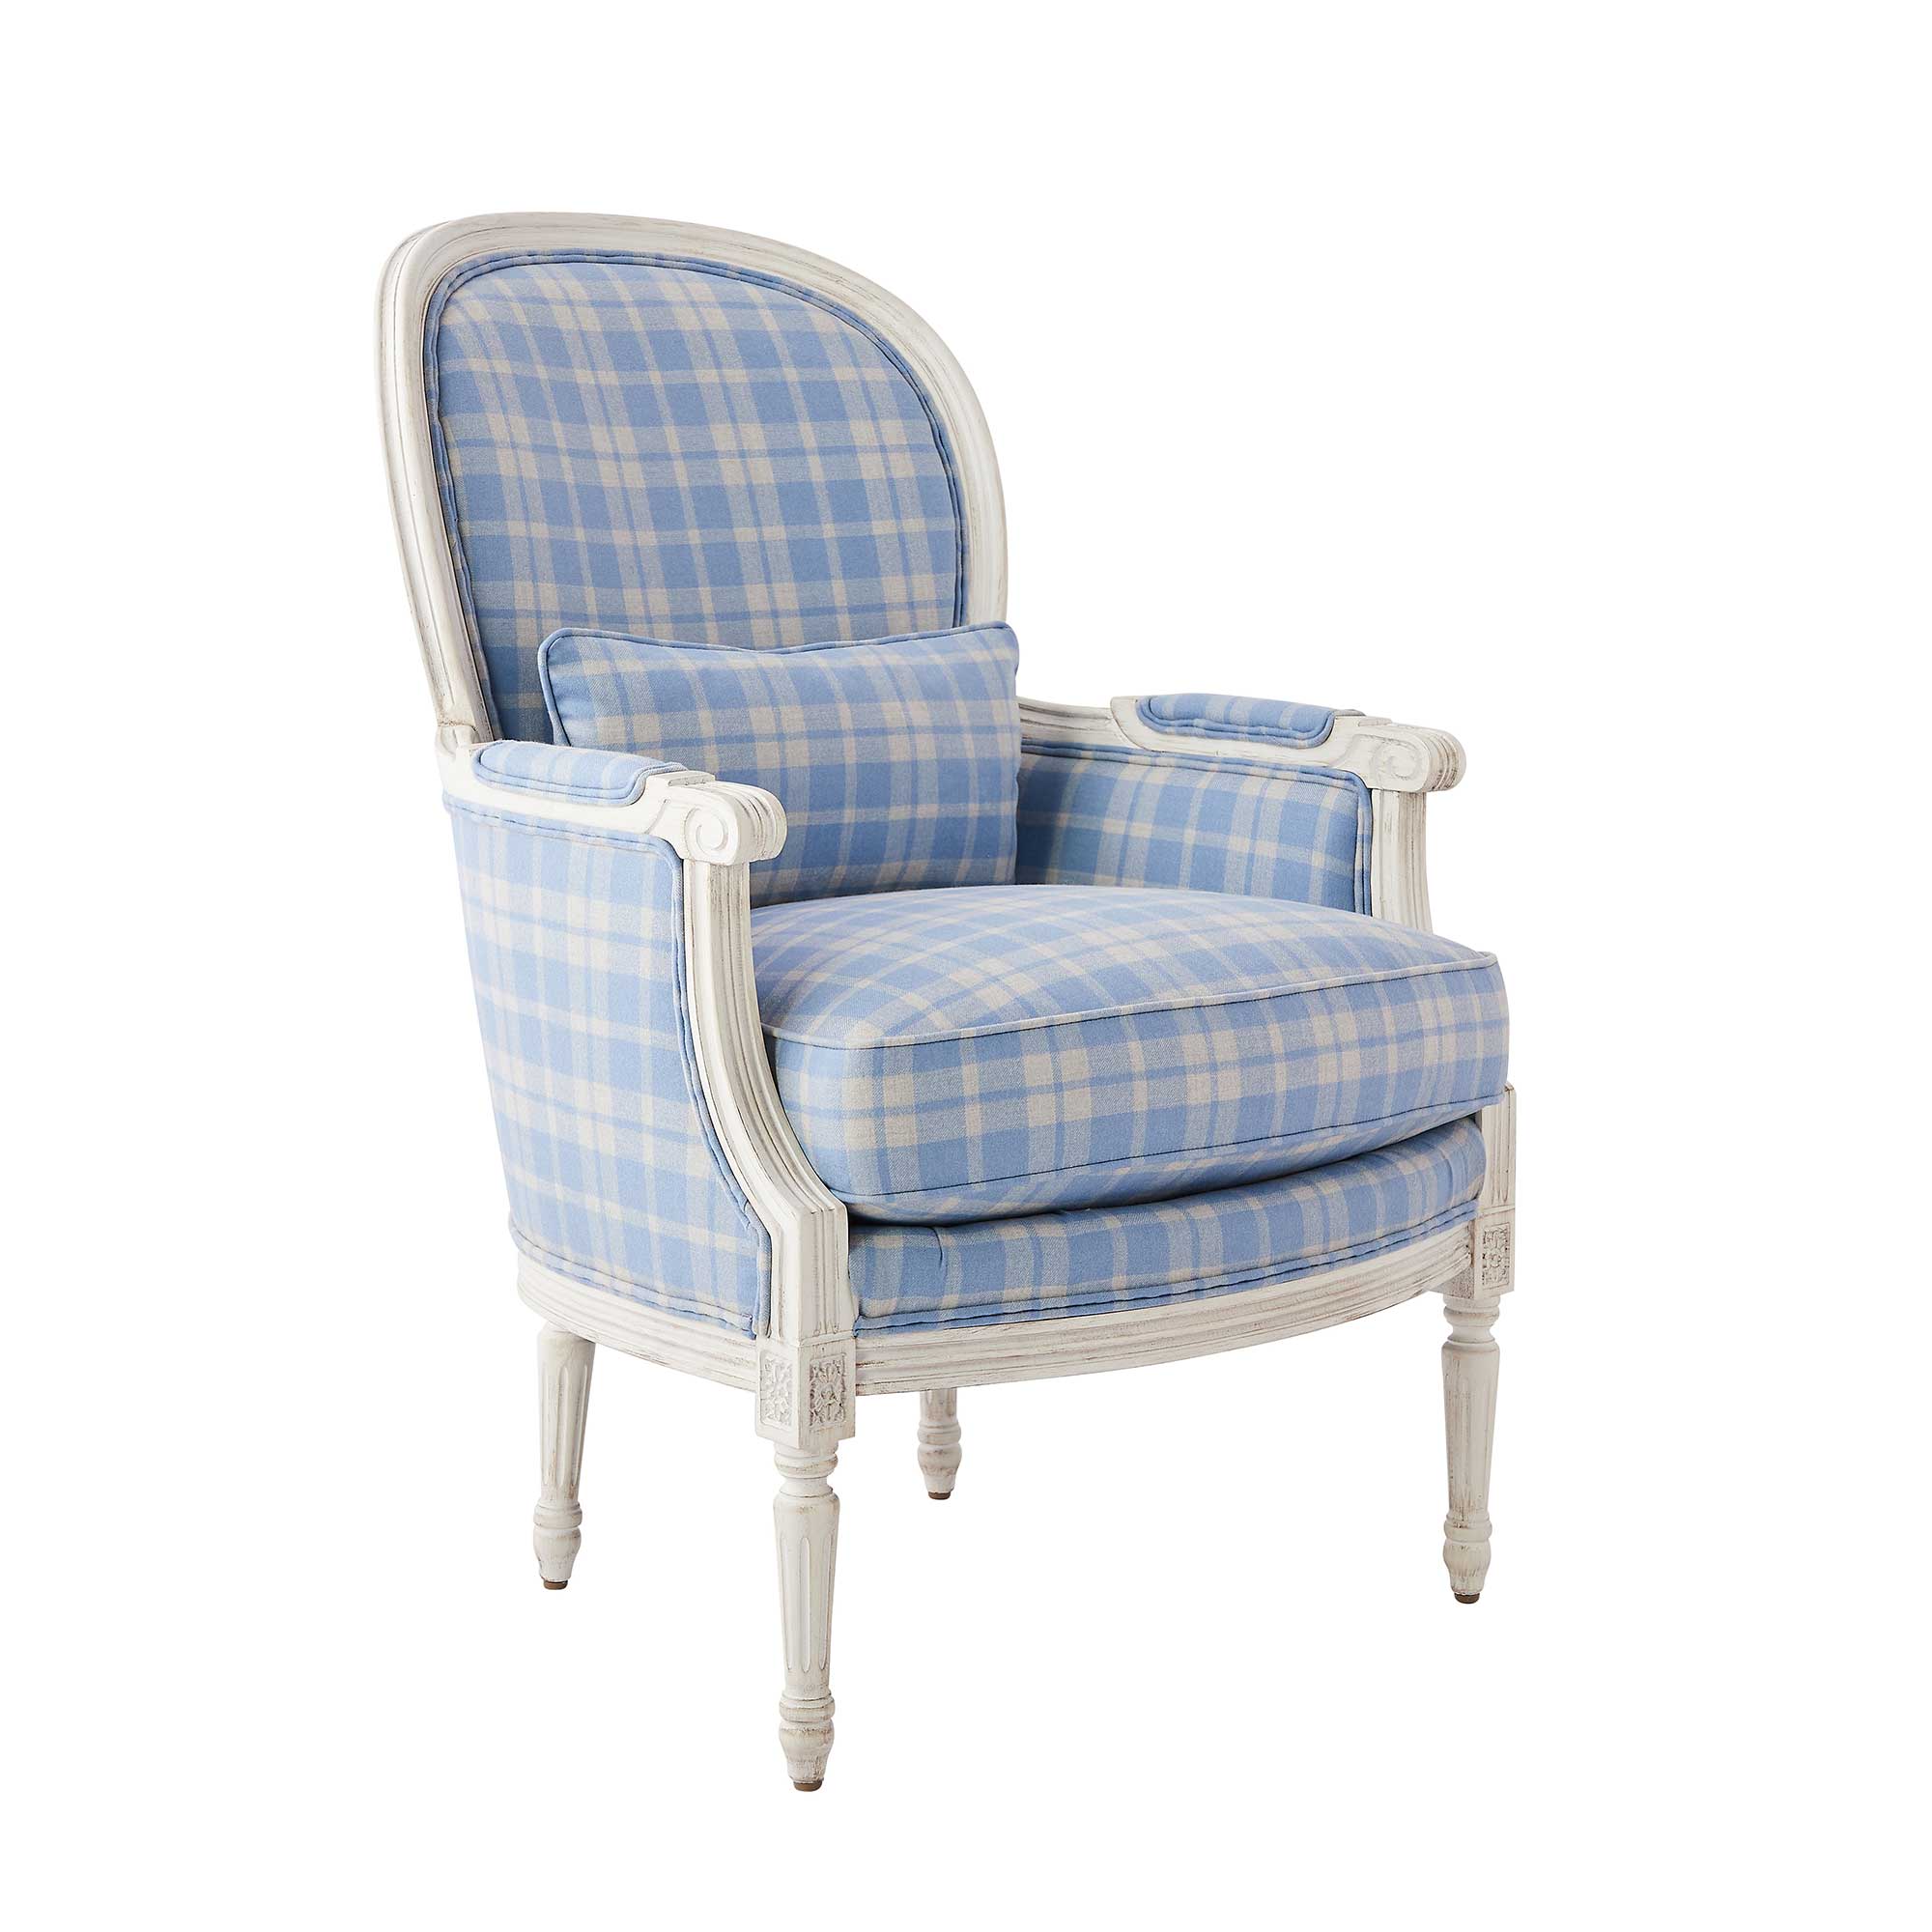 Adele Lounge Chair in Blue Plaid